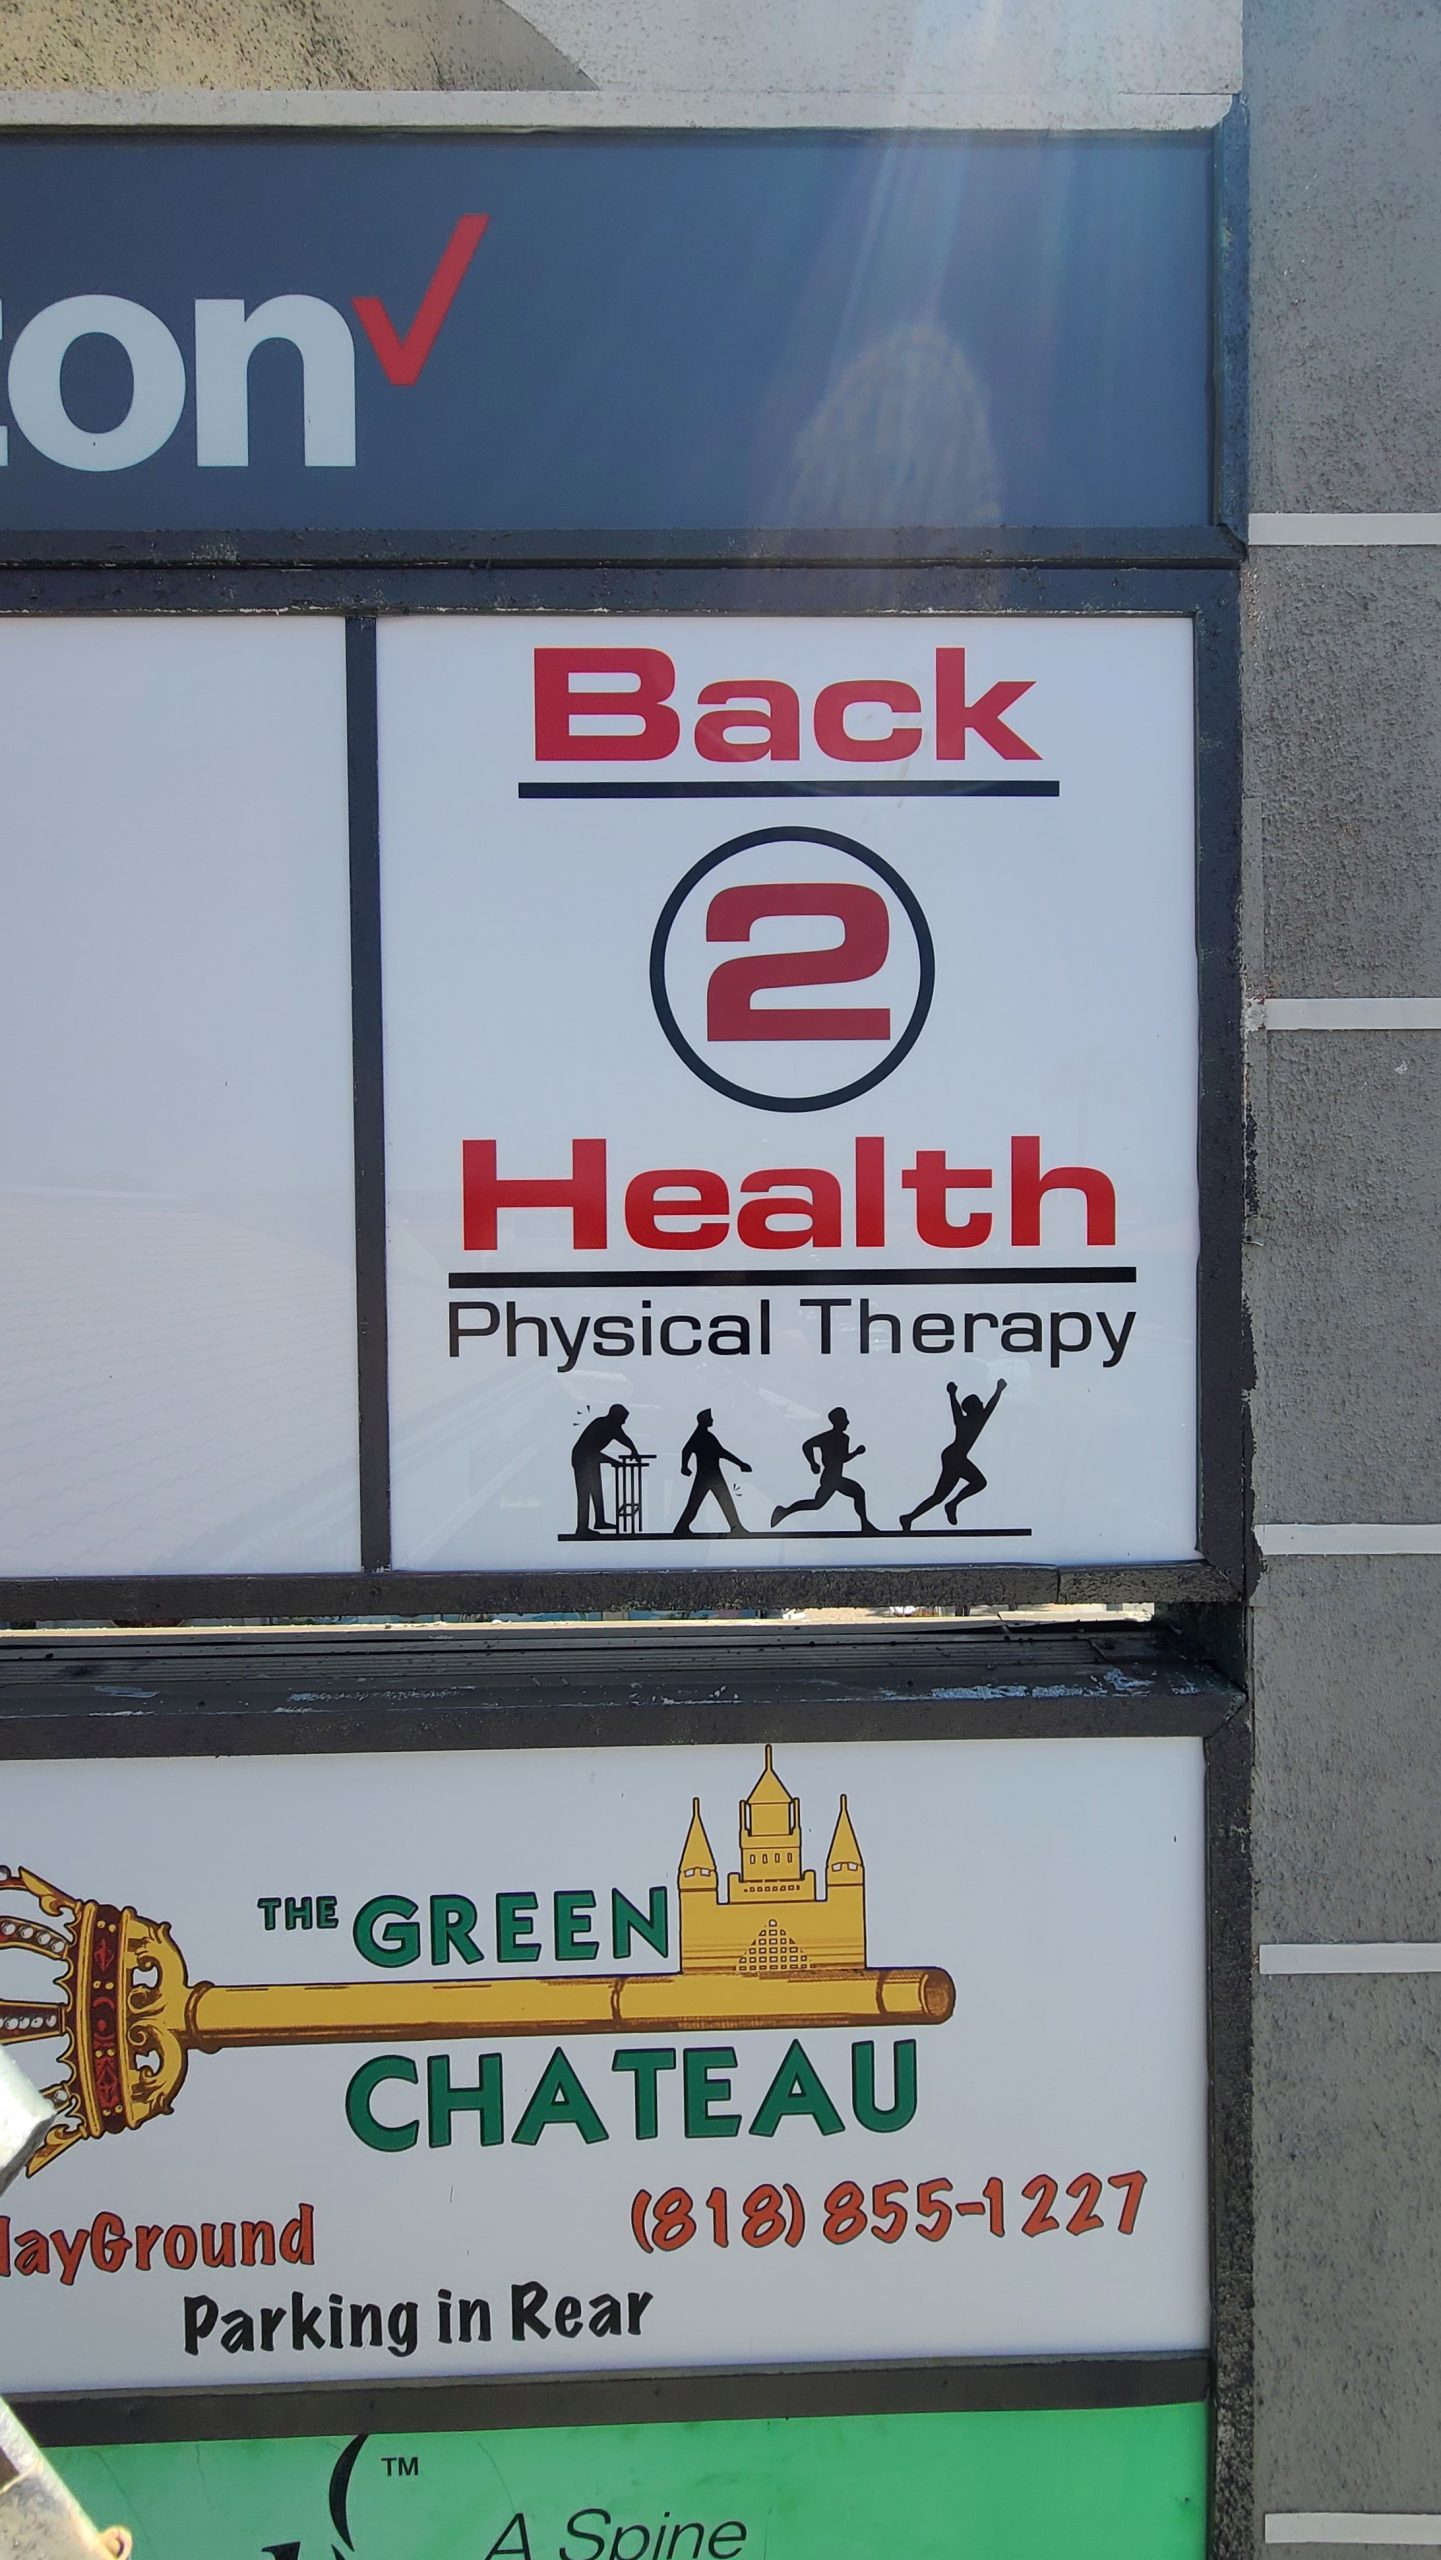 Going high is one surefire way of increasing visibility for your signage, like this business pole sign for Back 2 Health's Encino center.